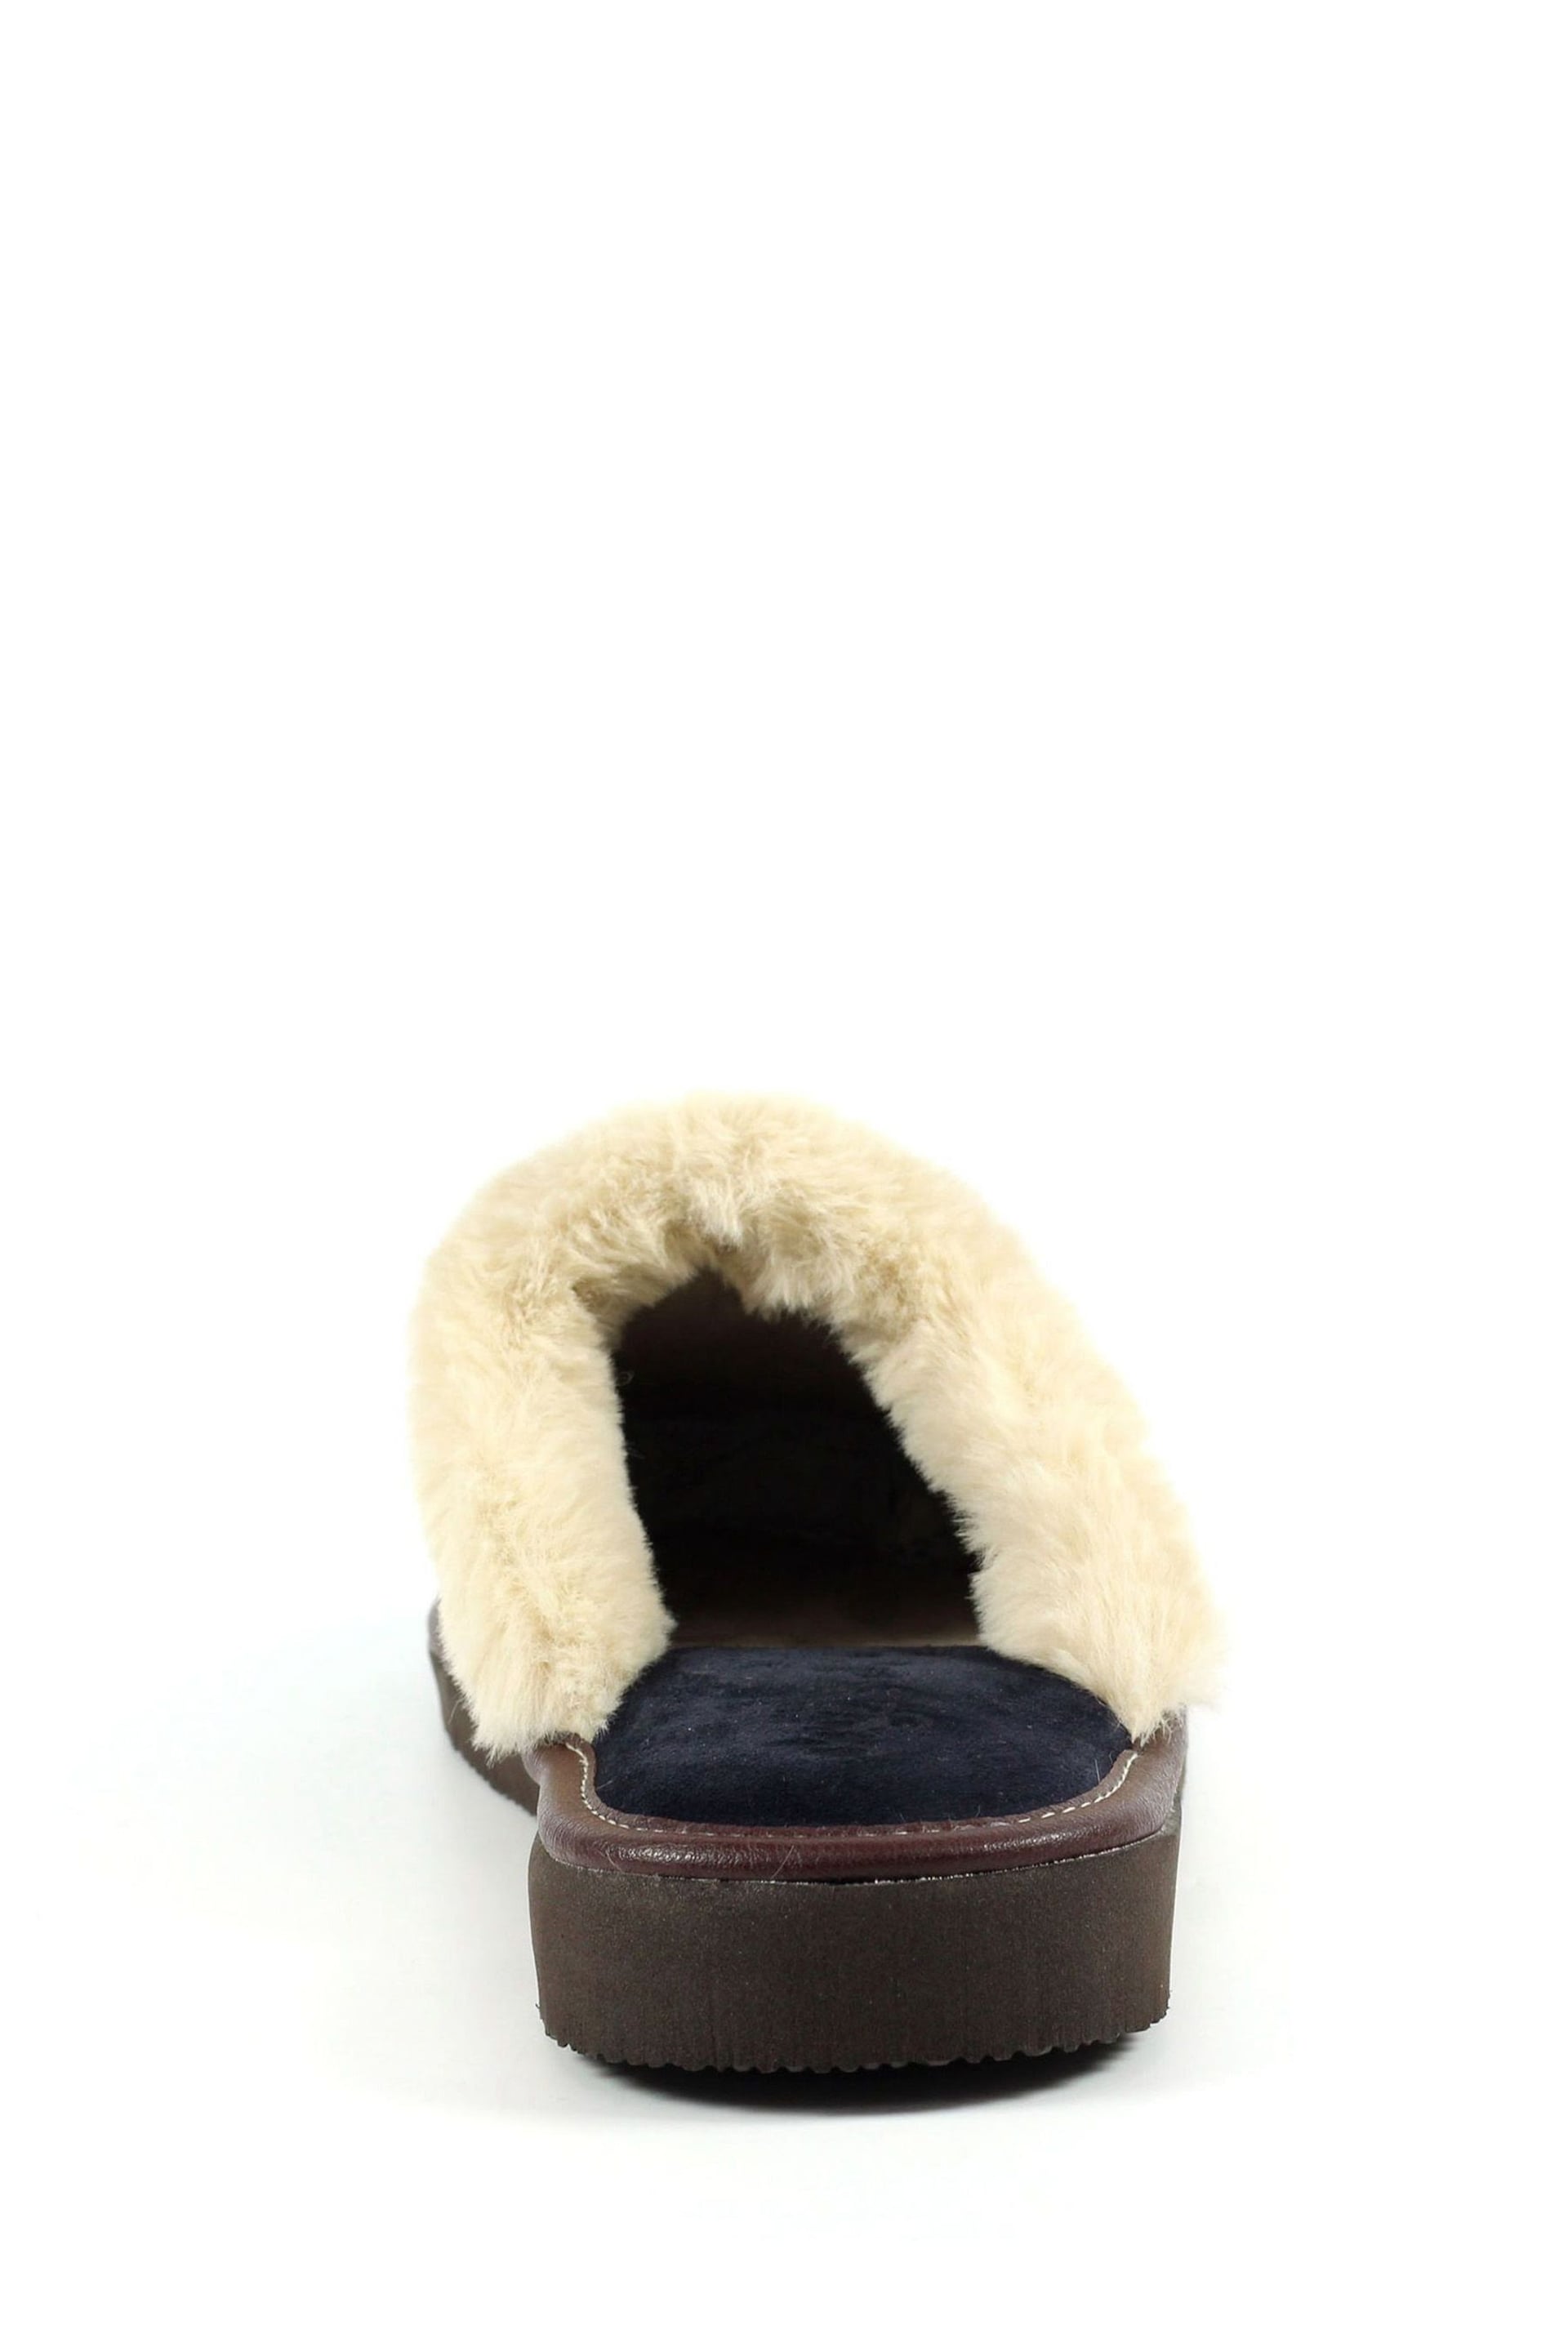 Lunar Lazy Dogz Otto Suede Mule Slippers - Image 6 of 10